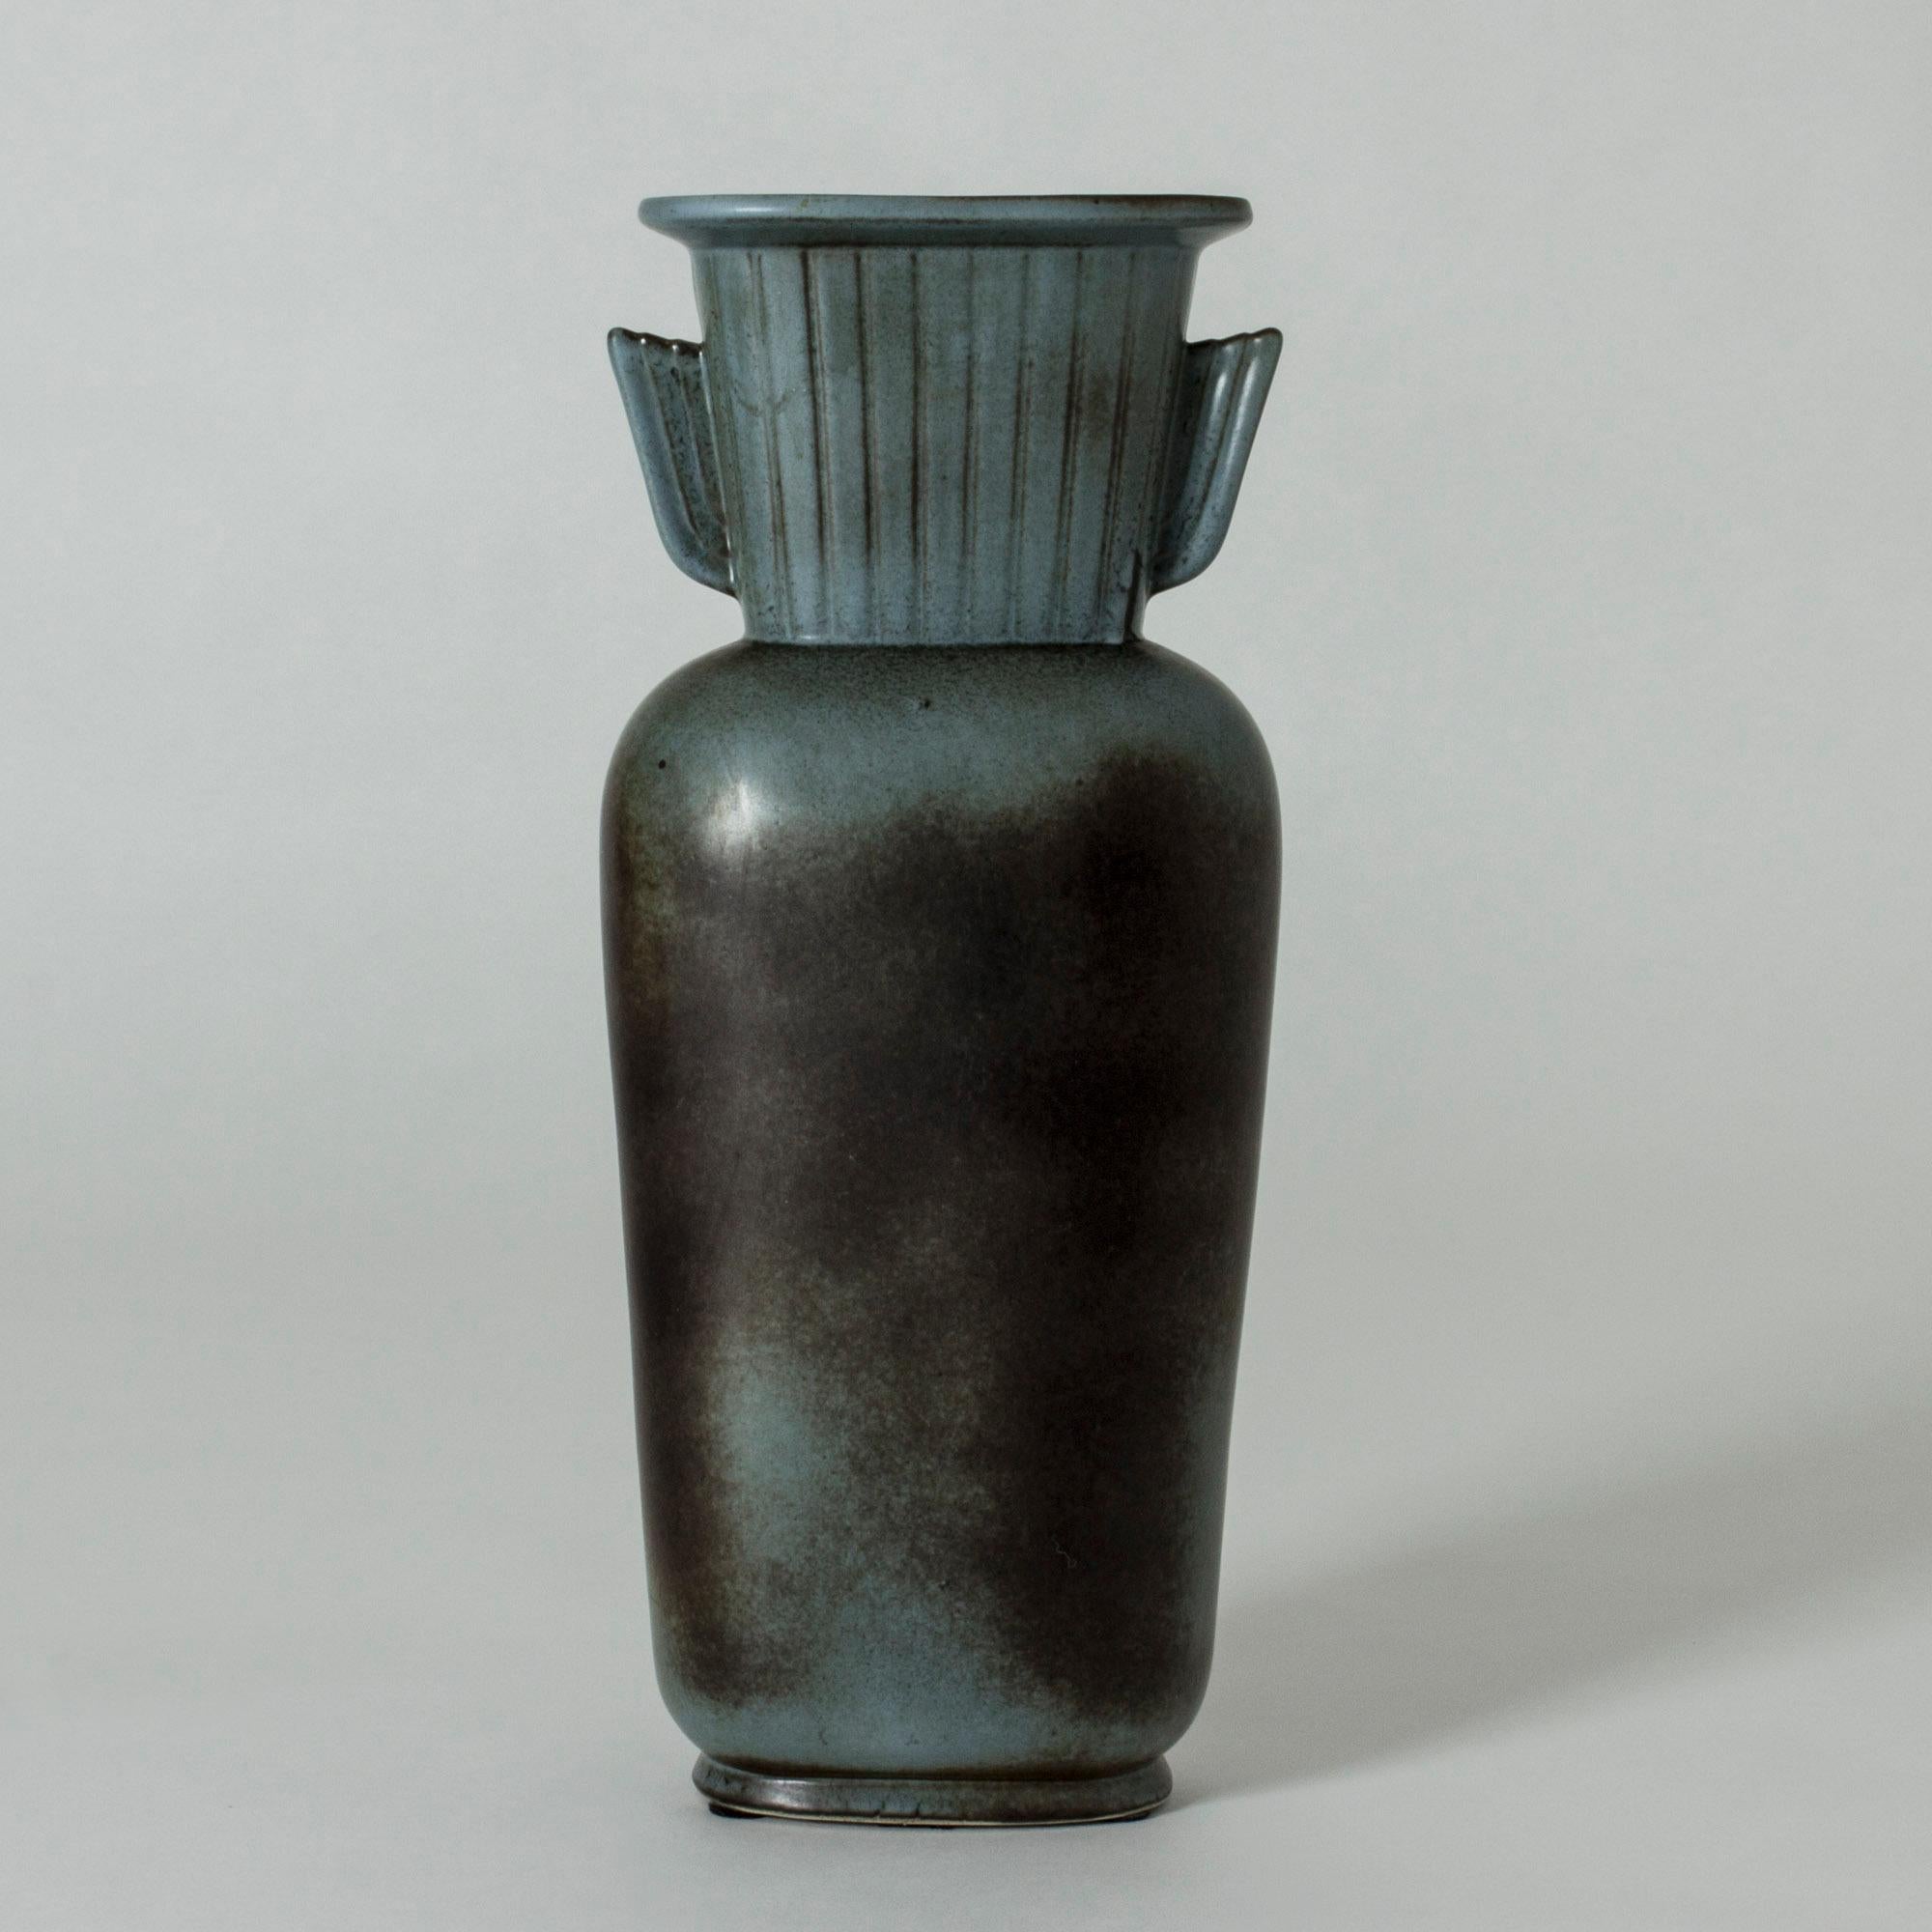 Tall stoneware vase in a statuesque design by Gunnar Nylund. Clean, soft lines. Beautiful matte glaze in the color of oxidized copper.